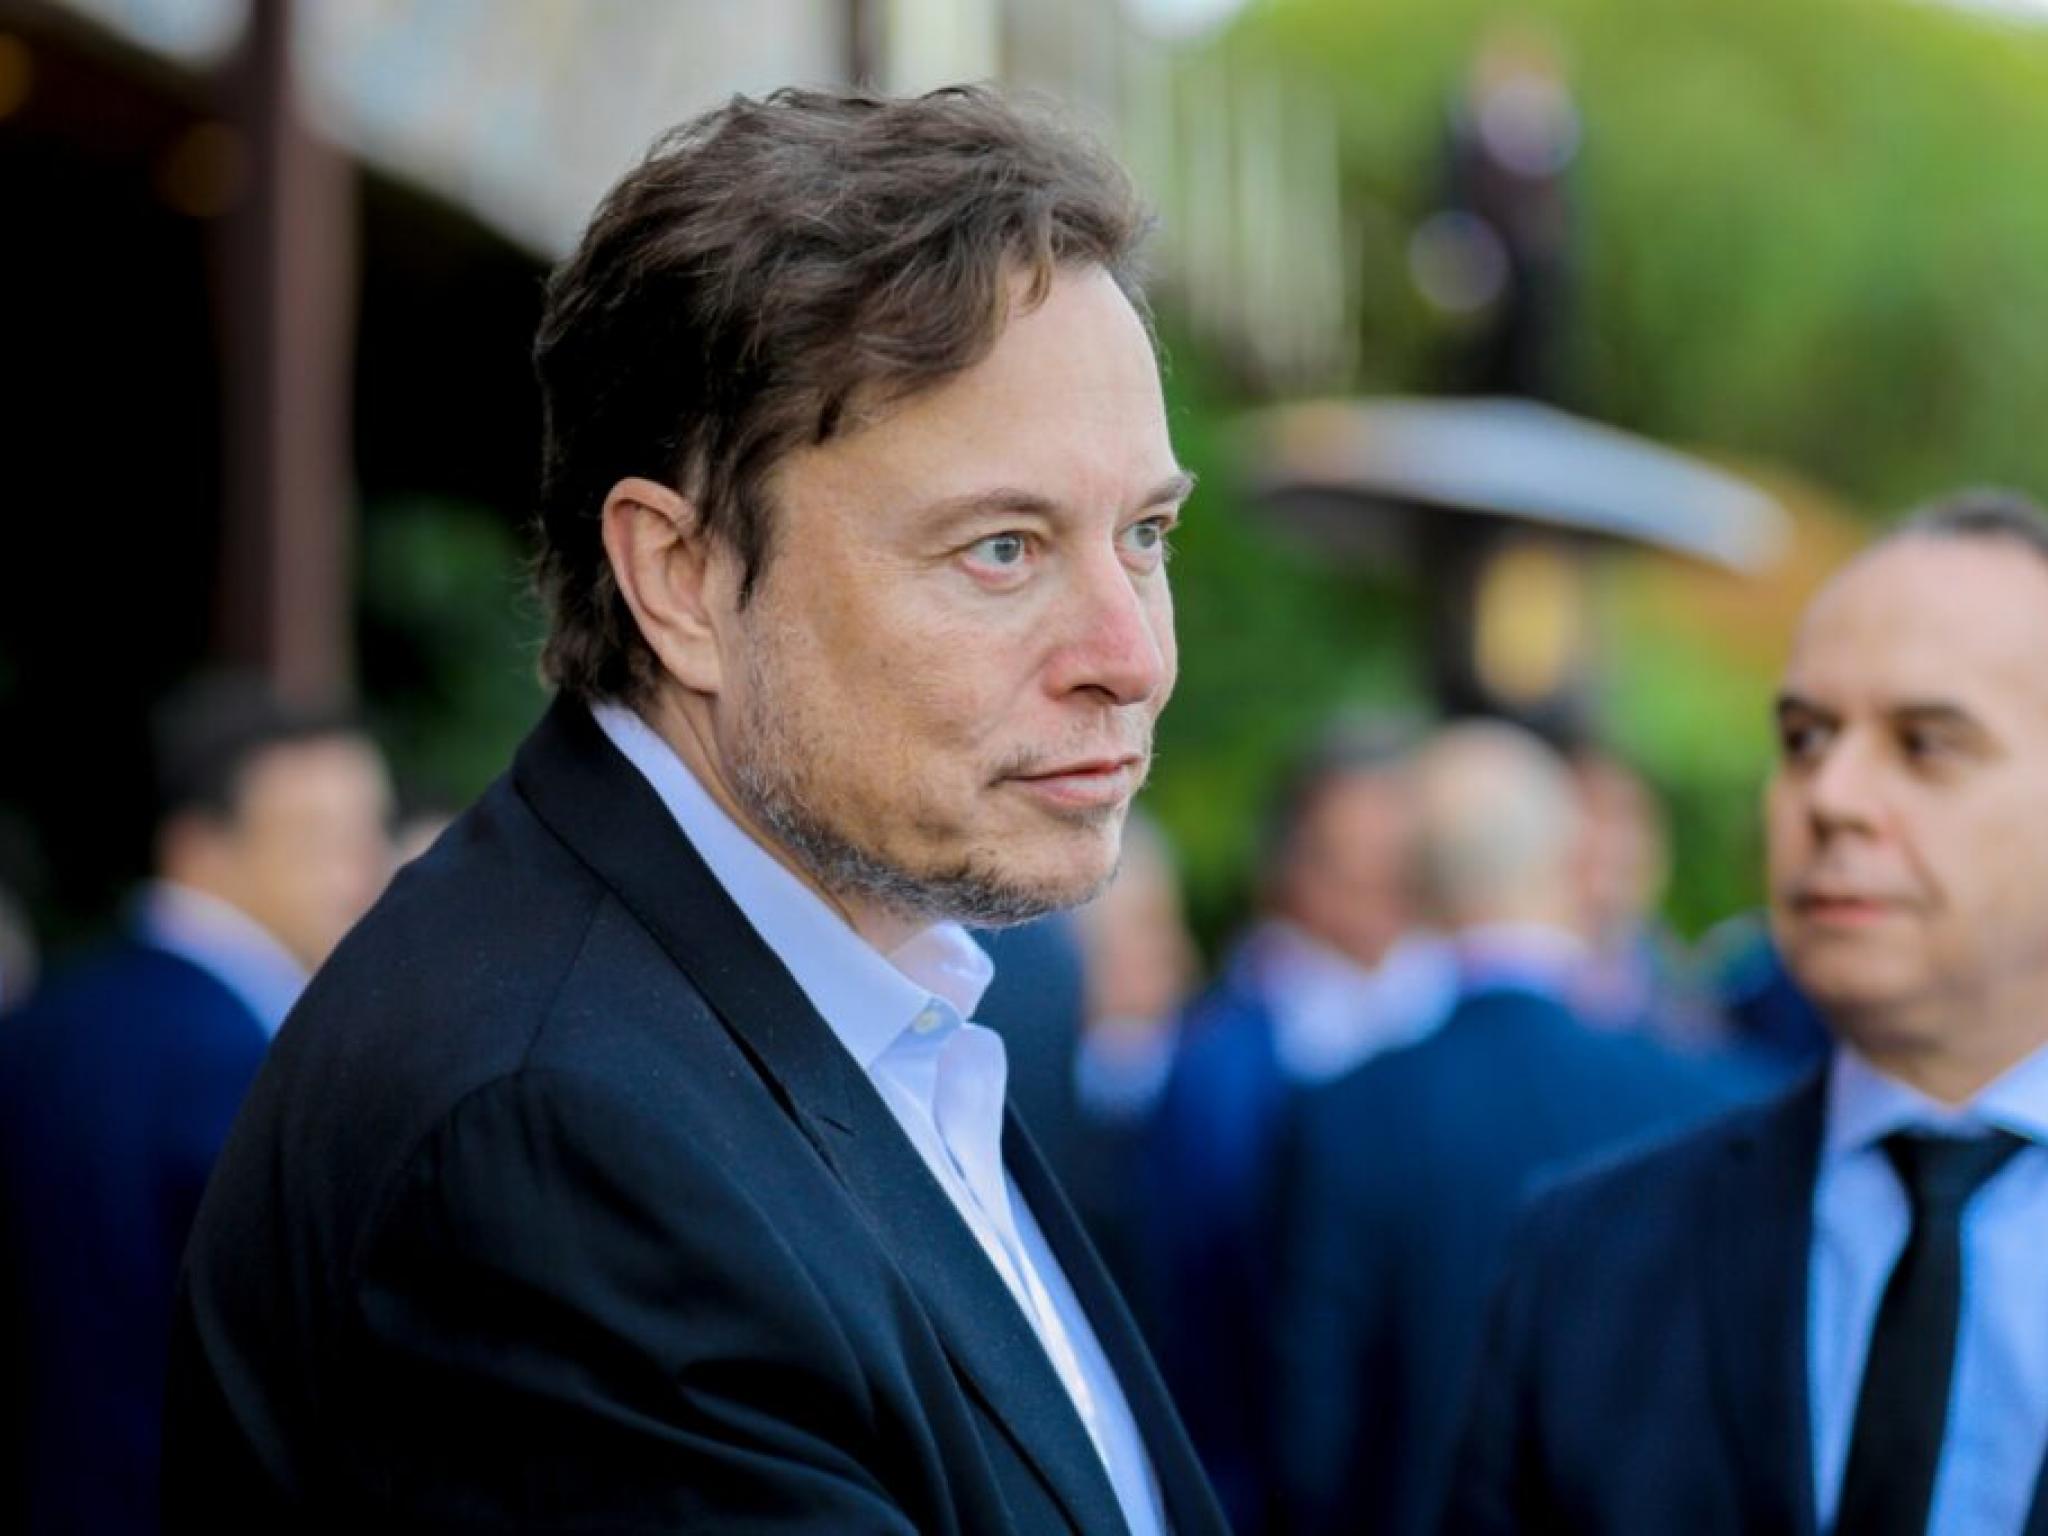 Elon Musk Has A Whopping $200B But These 3 Things Still Keep Him Away From A Good Night’s Sleep